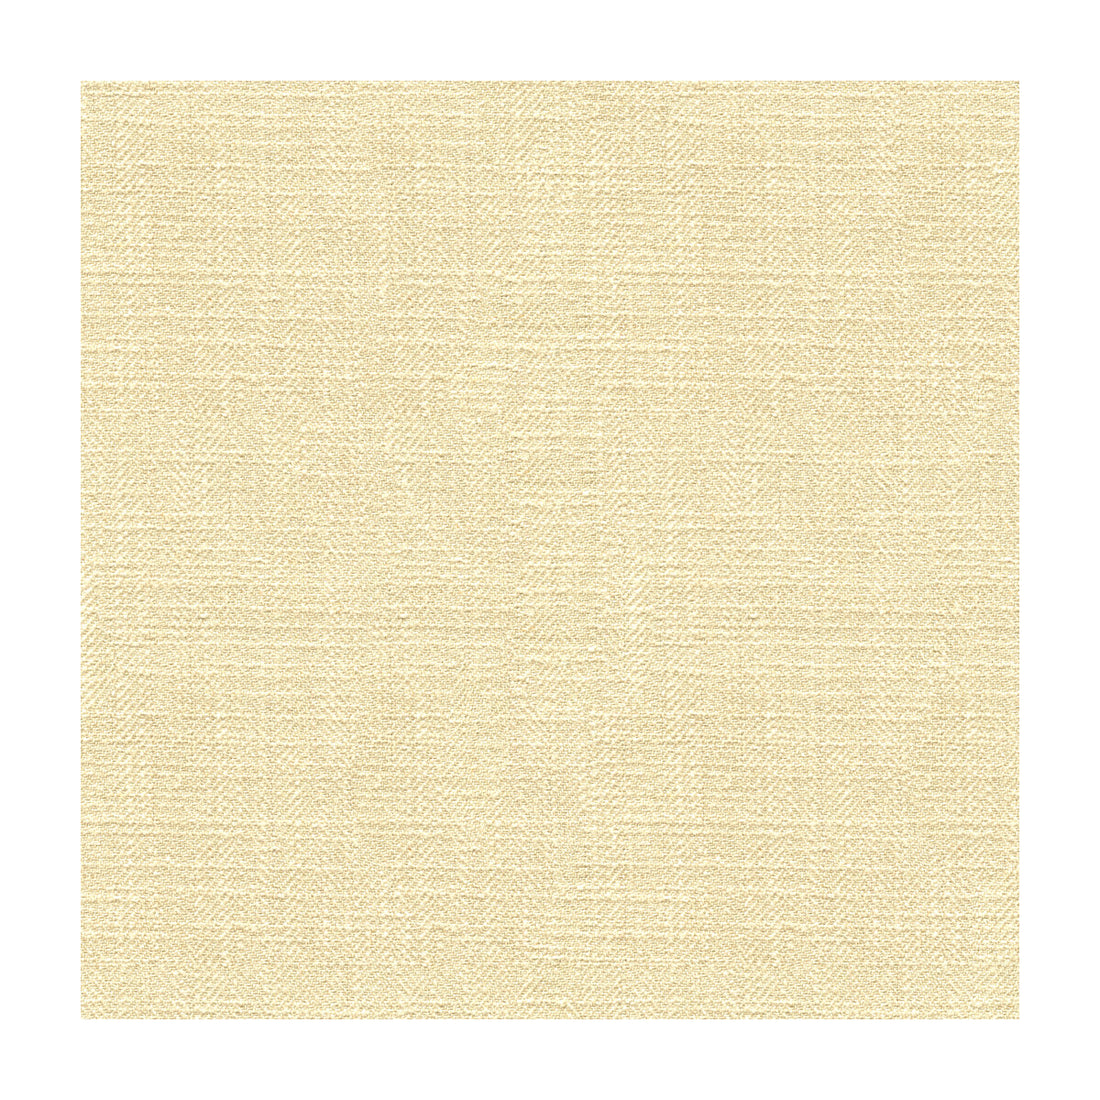 Kravet Basics fabric in 33842-1121 color - pattern 33842.1121.0 - by Kravet Basics in the Perfect Plains collection